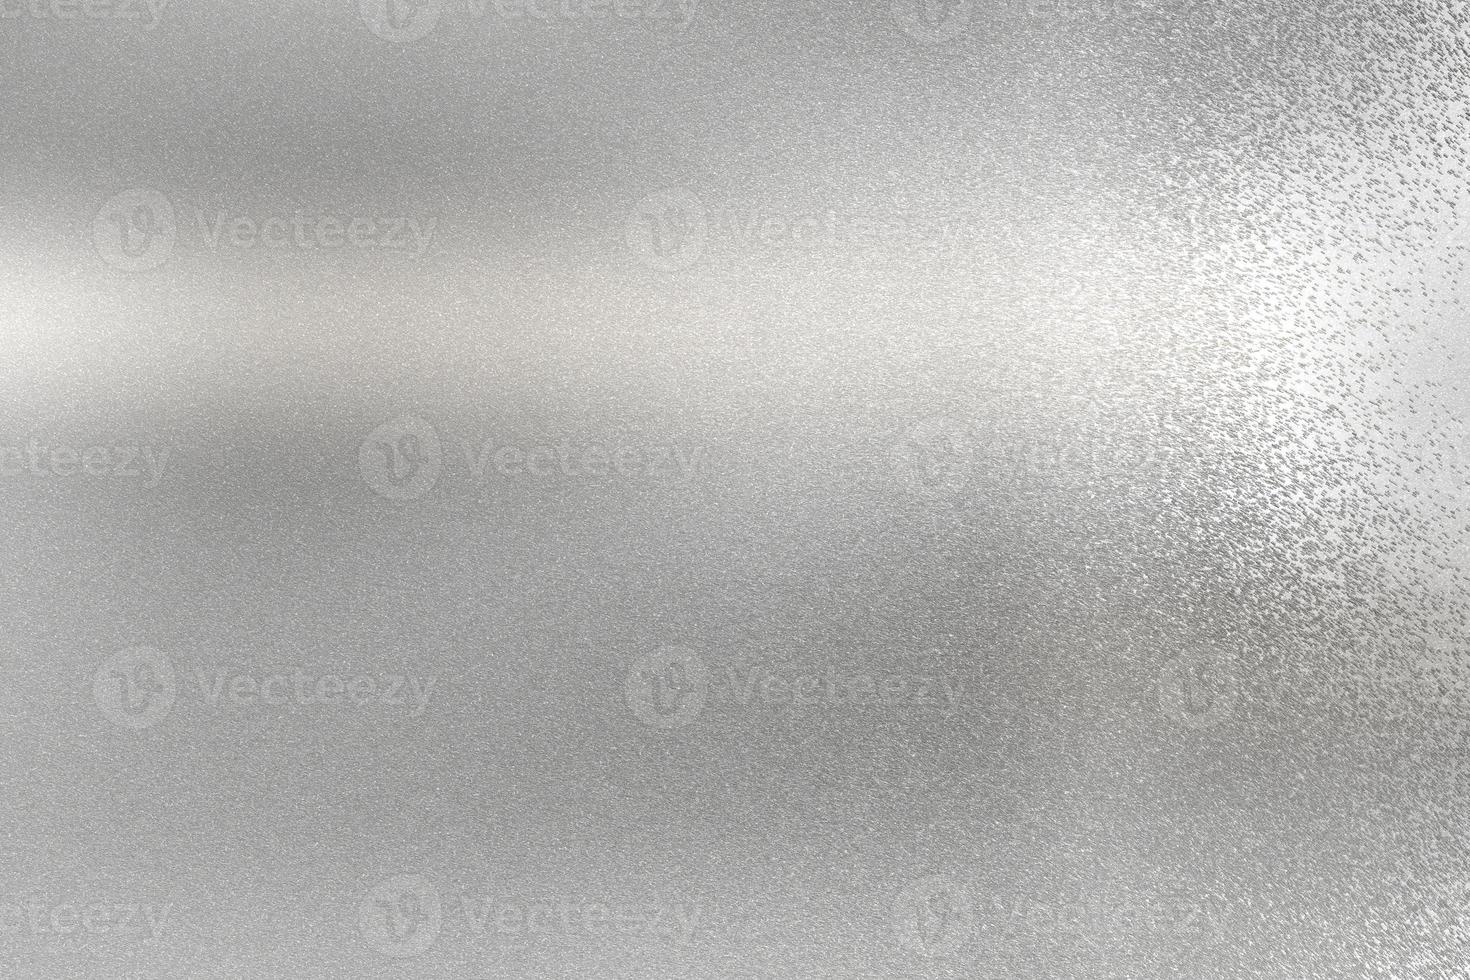 Glowing brushed silver steel plate, abstract texture background photo